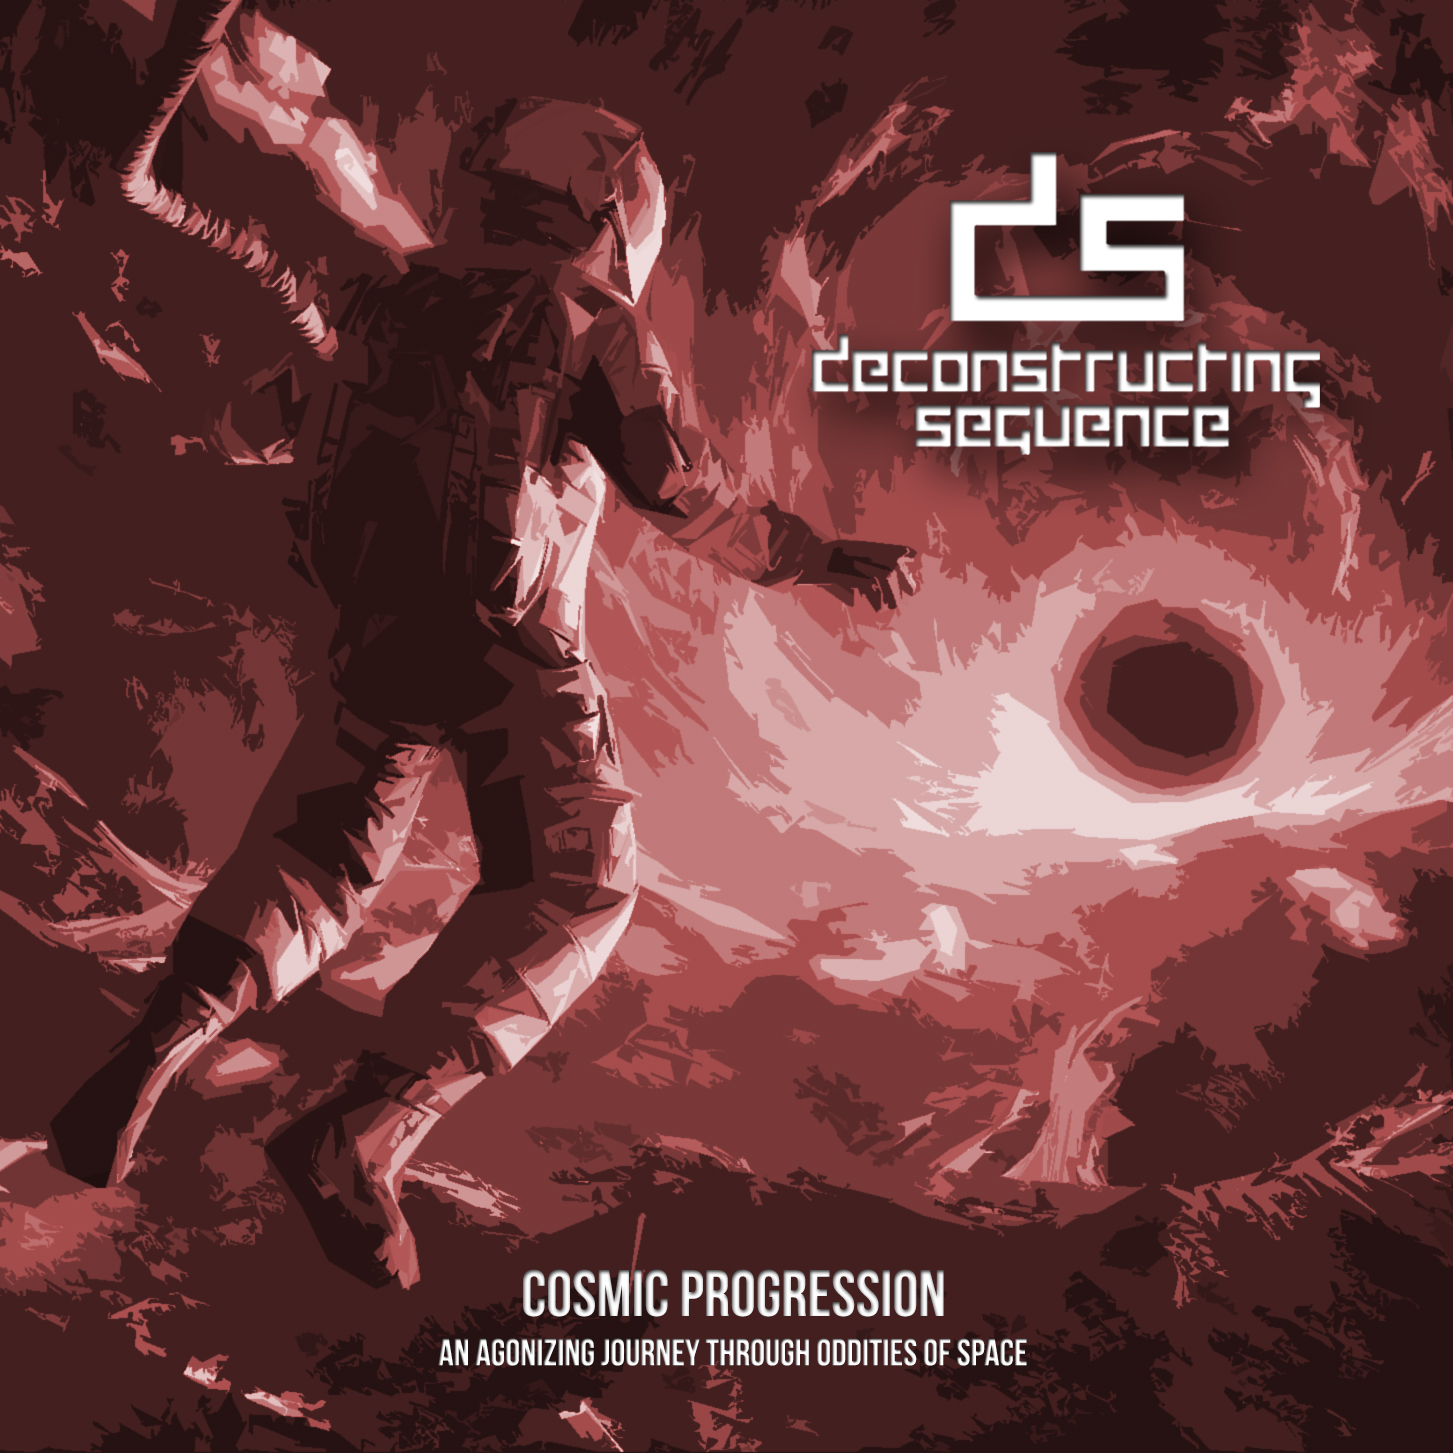 Deconstructing Sequence – Cosmic Progression: The Agonizing Journey Through Oddities Of Space